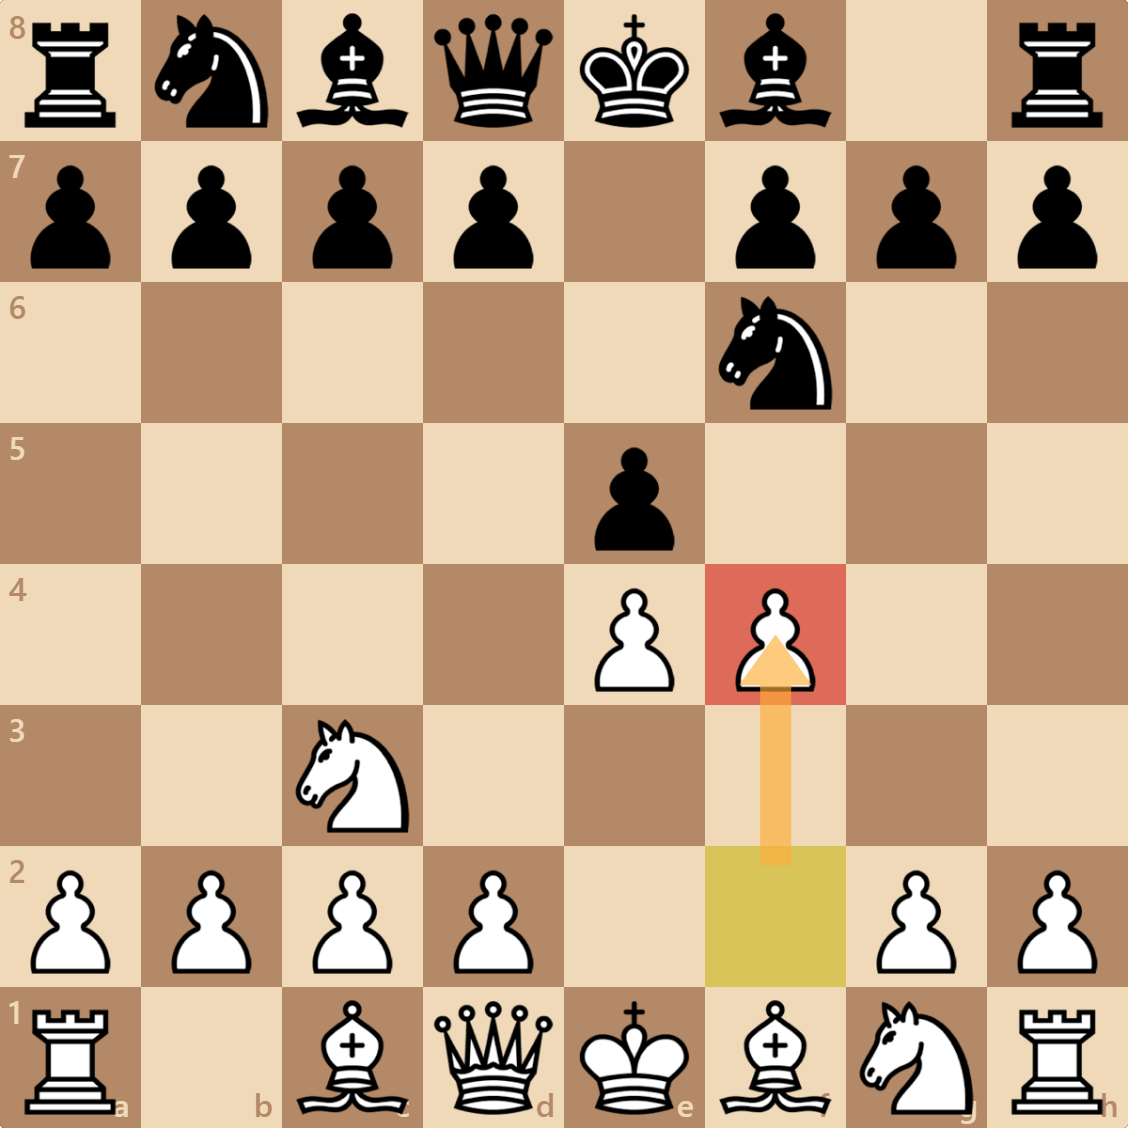 Queen's Gambit Accepted: Complete Guide for White